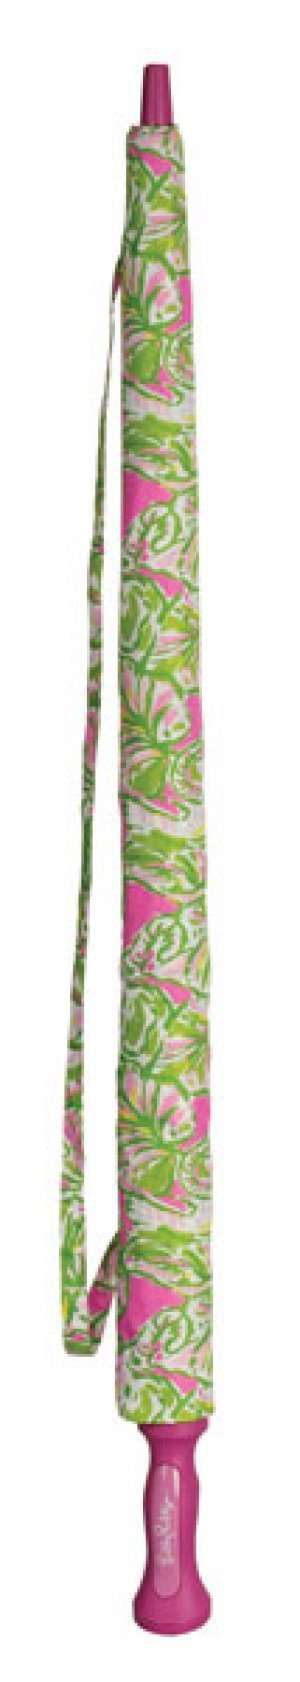 Large Umbrella in Elephant Ears by Lilly Pulitzer - Country Club Prep